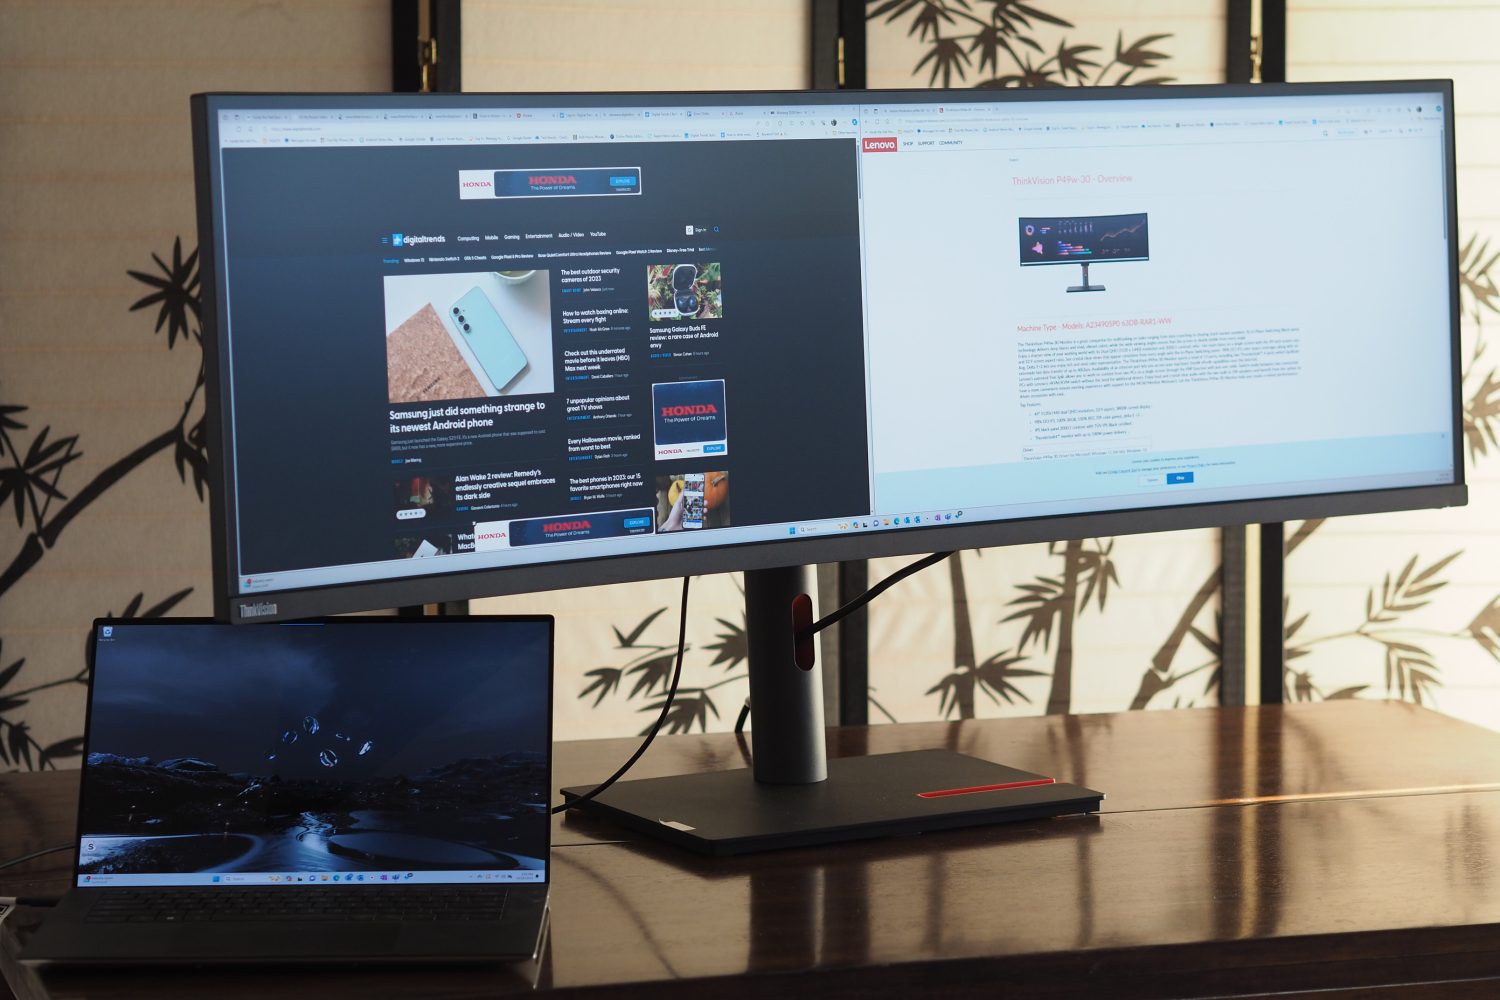 Lenovo ThinkVision P49w-30 monitor front angled view showing screen and stand.